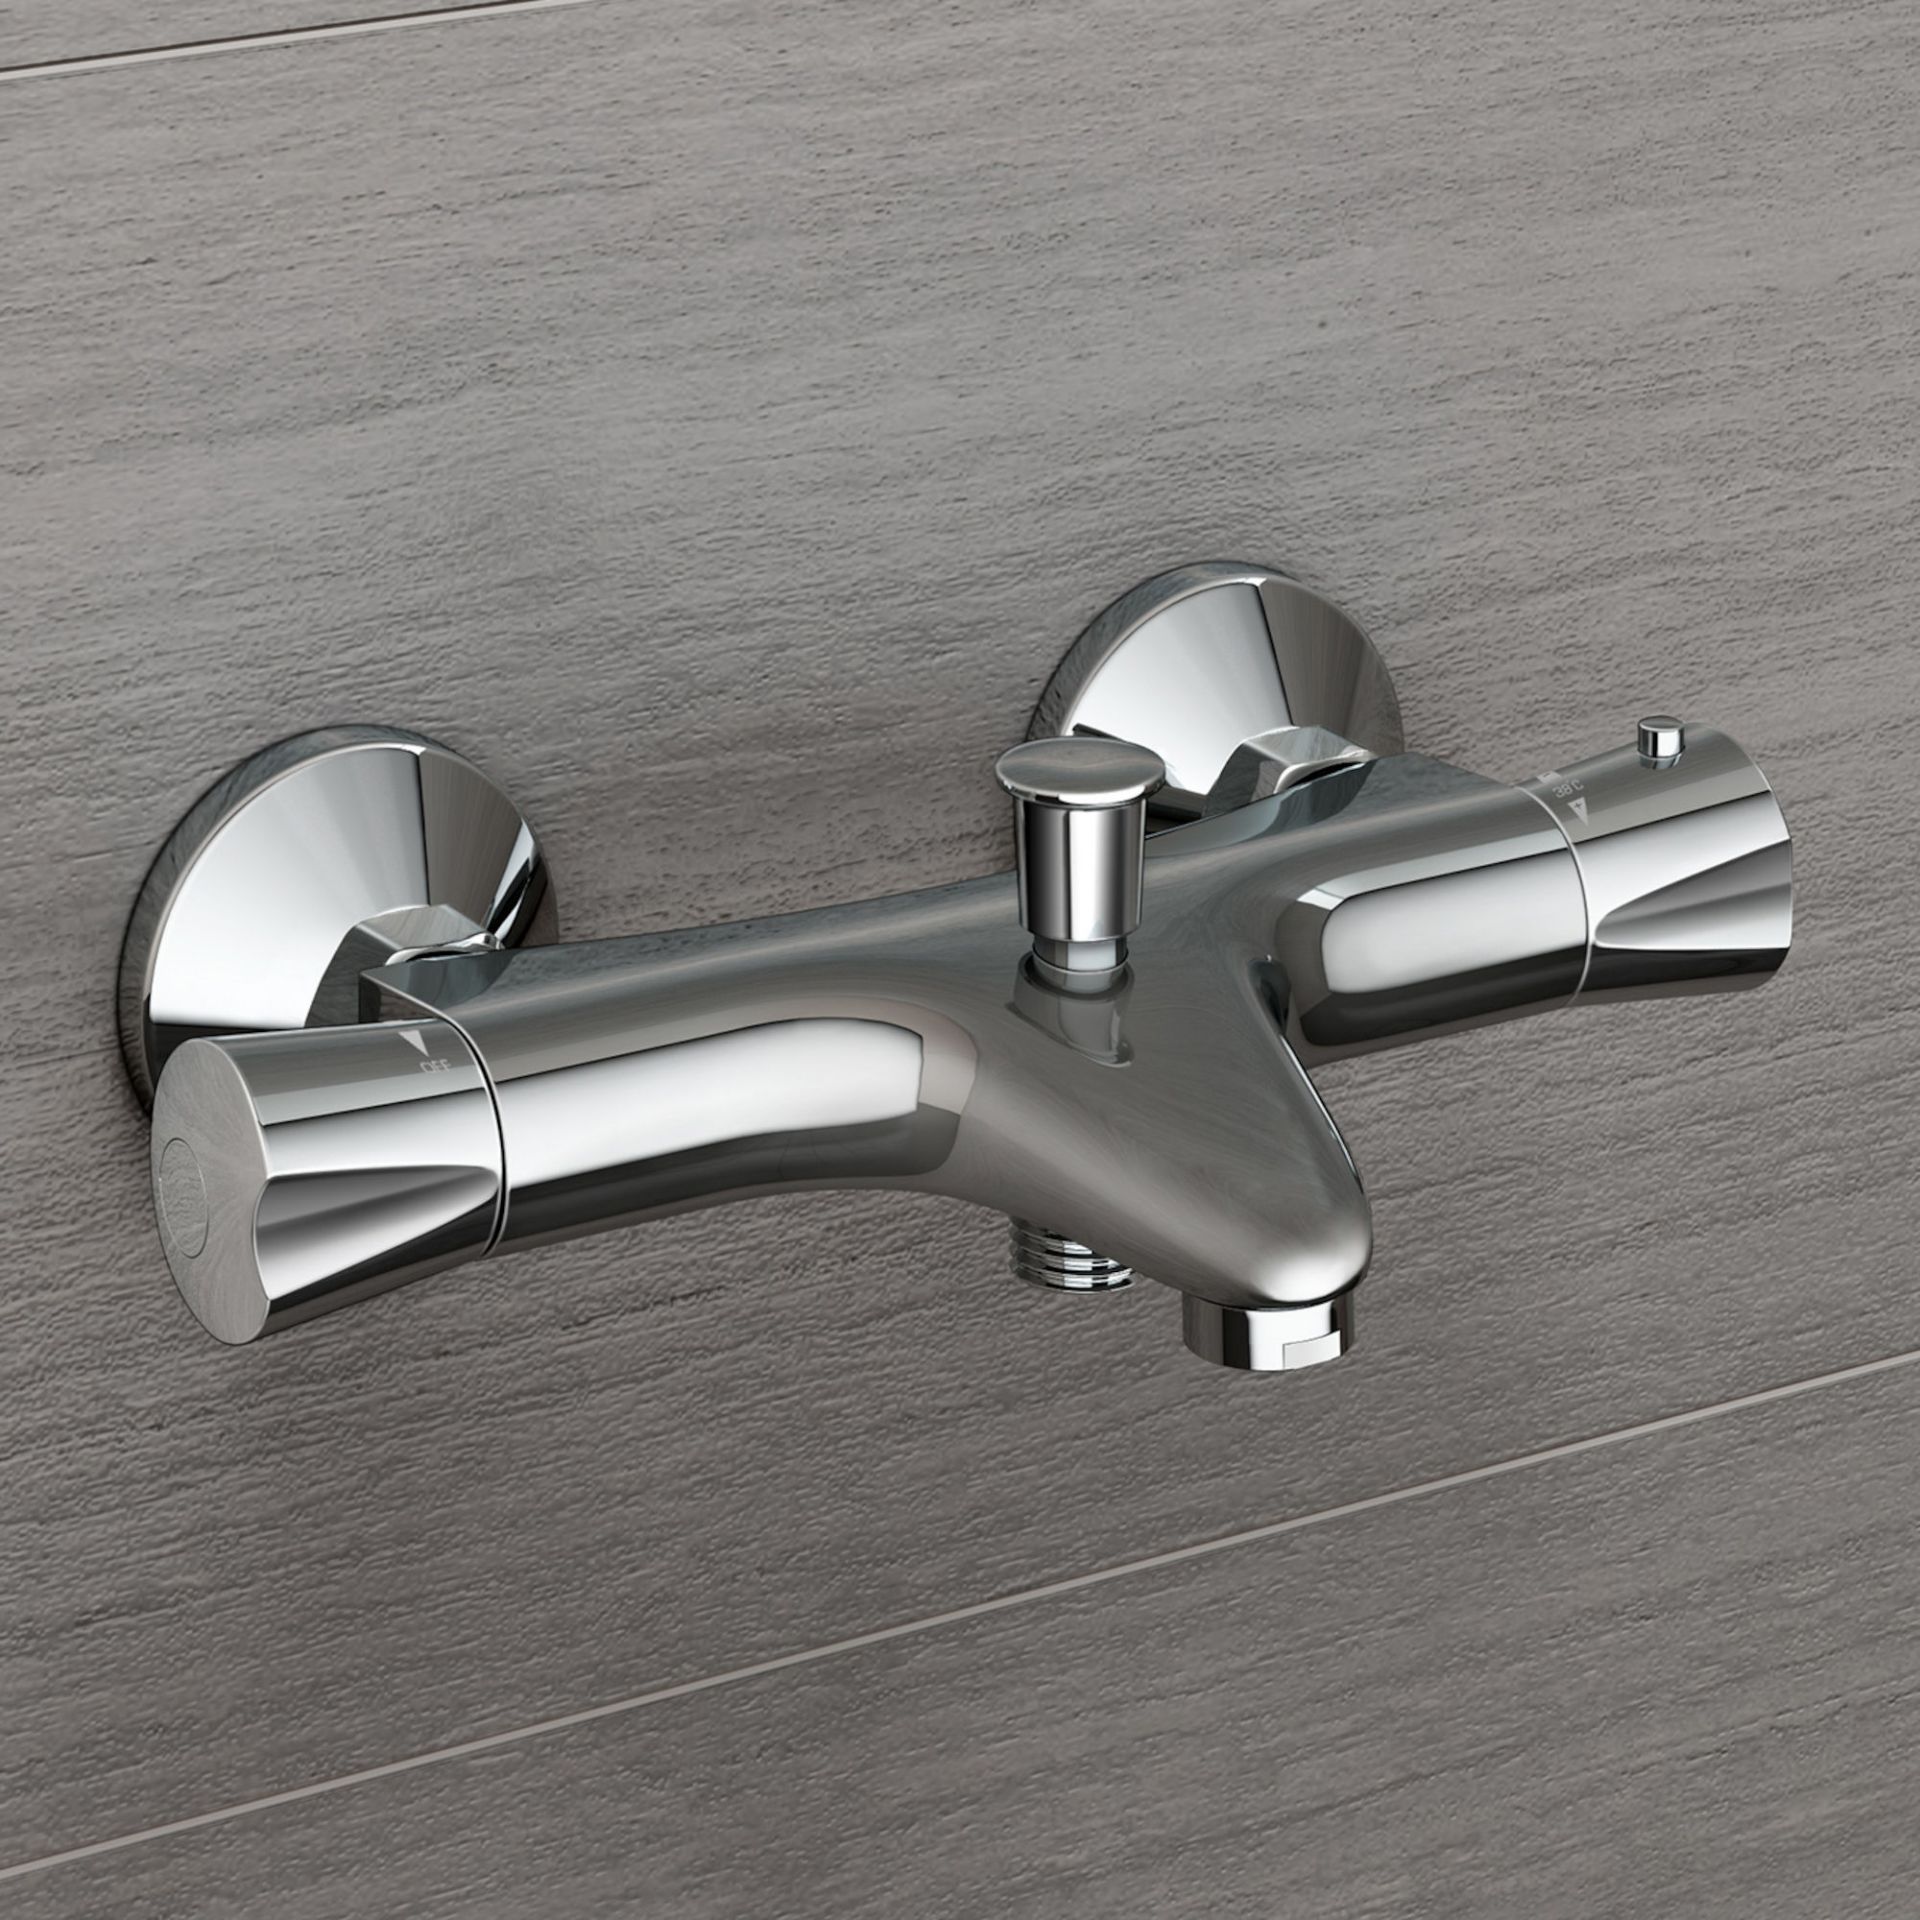 (RK1027) Shower Mixer Valve with Bath Filler. Rrp £192.99. Chrome Plated Solid Brass Mixer Th...